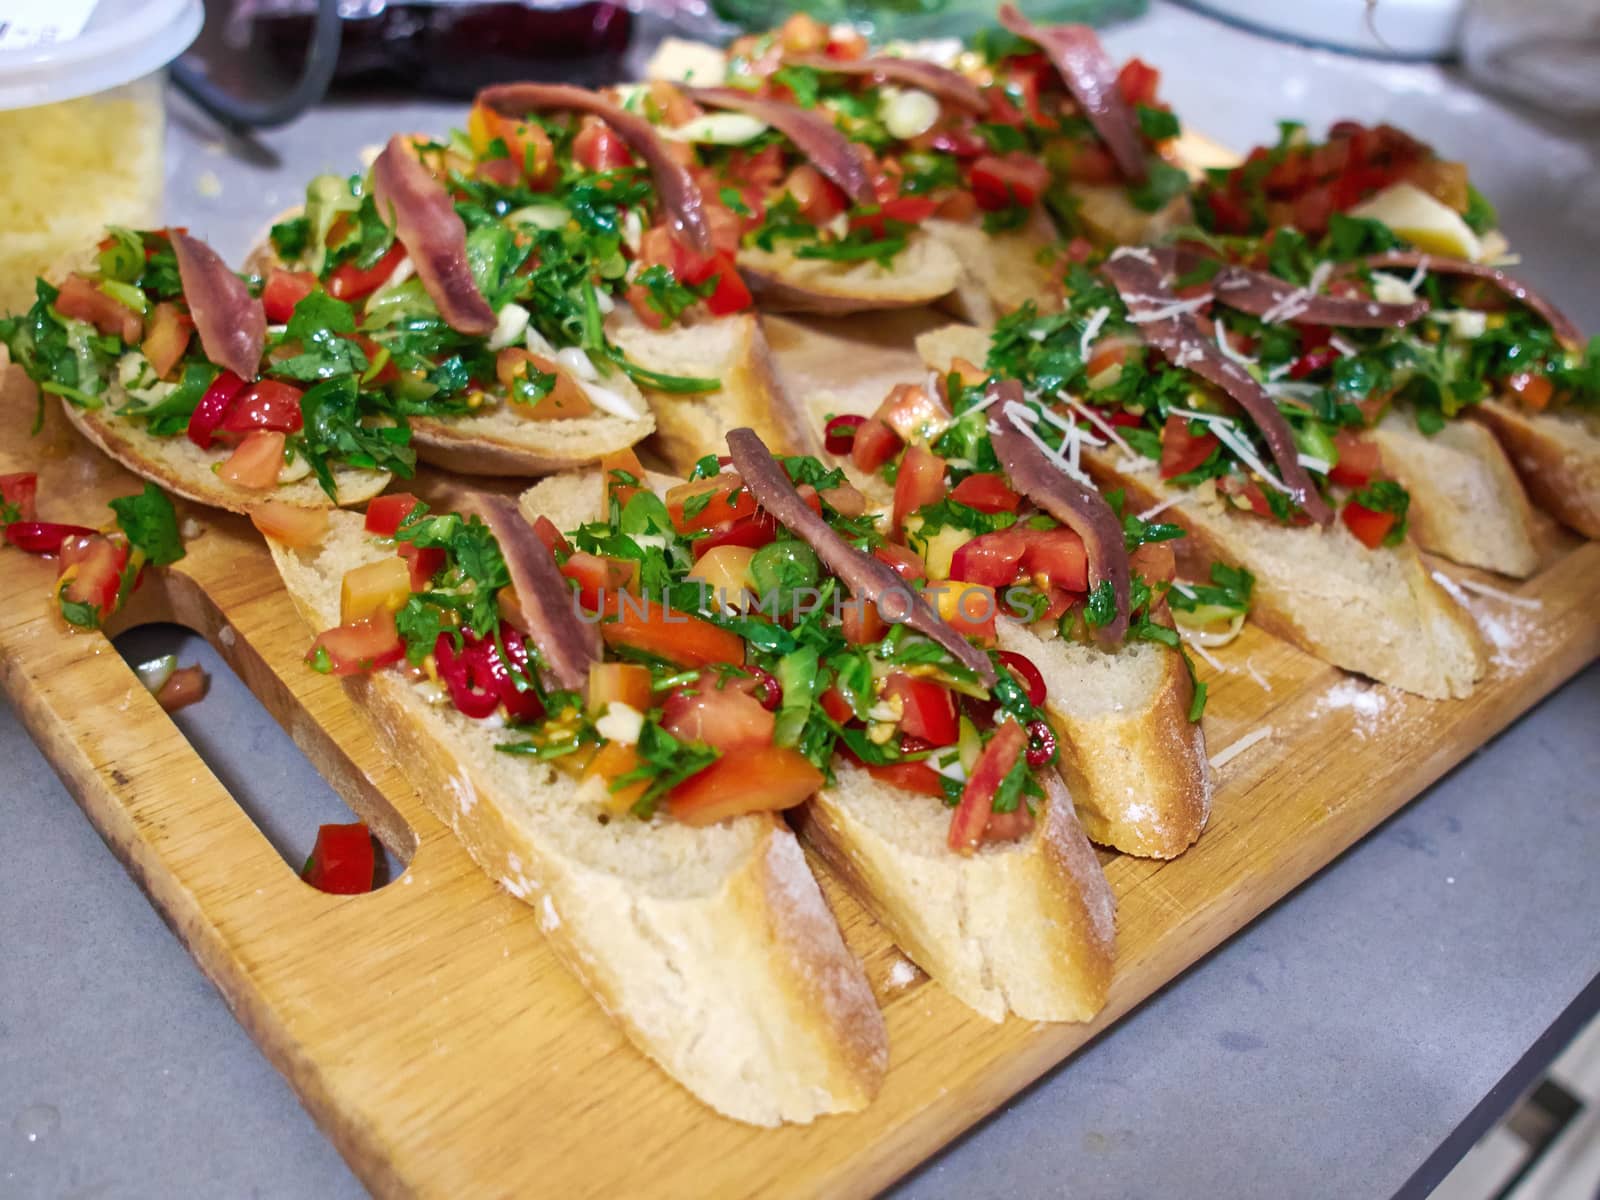 Typical classical Italian Bruschetta with tomatoes, herbs and oil on toasted garlic cheese bread on a wooden tray